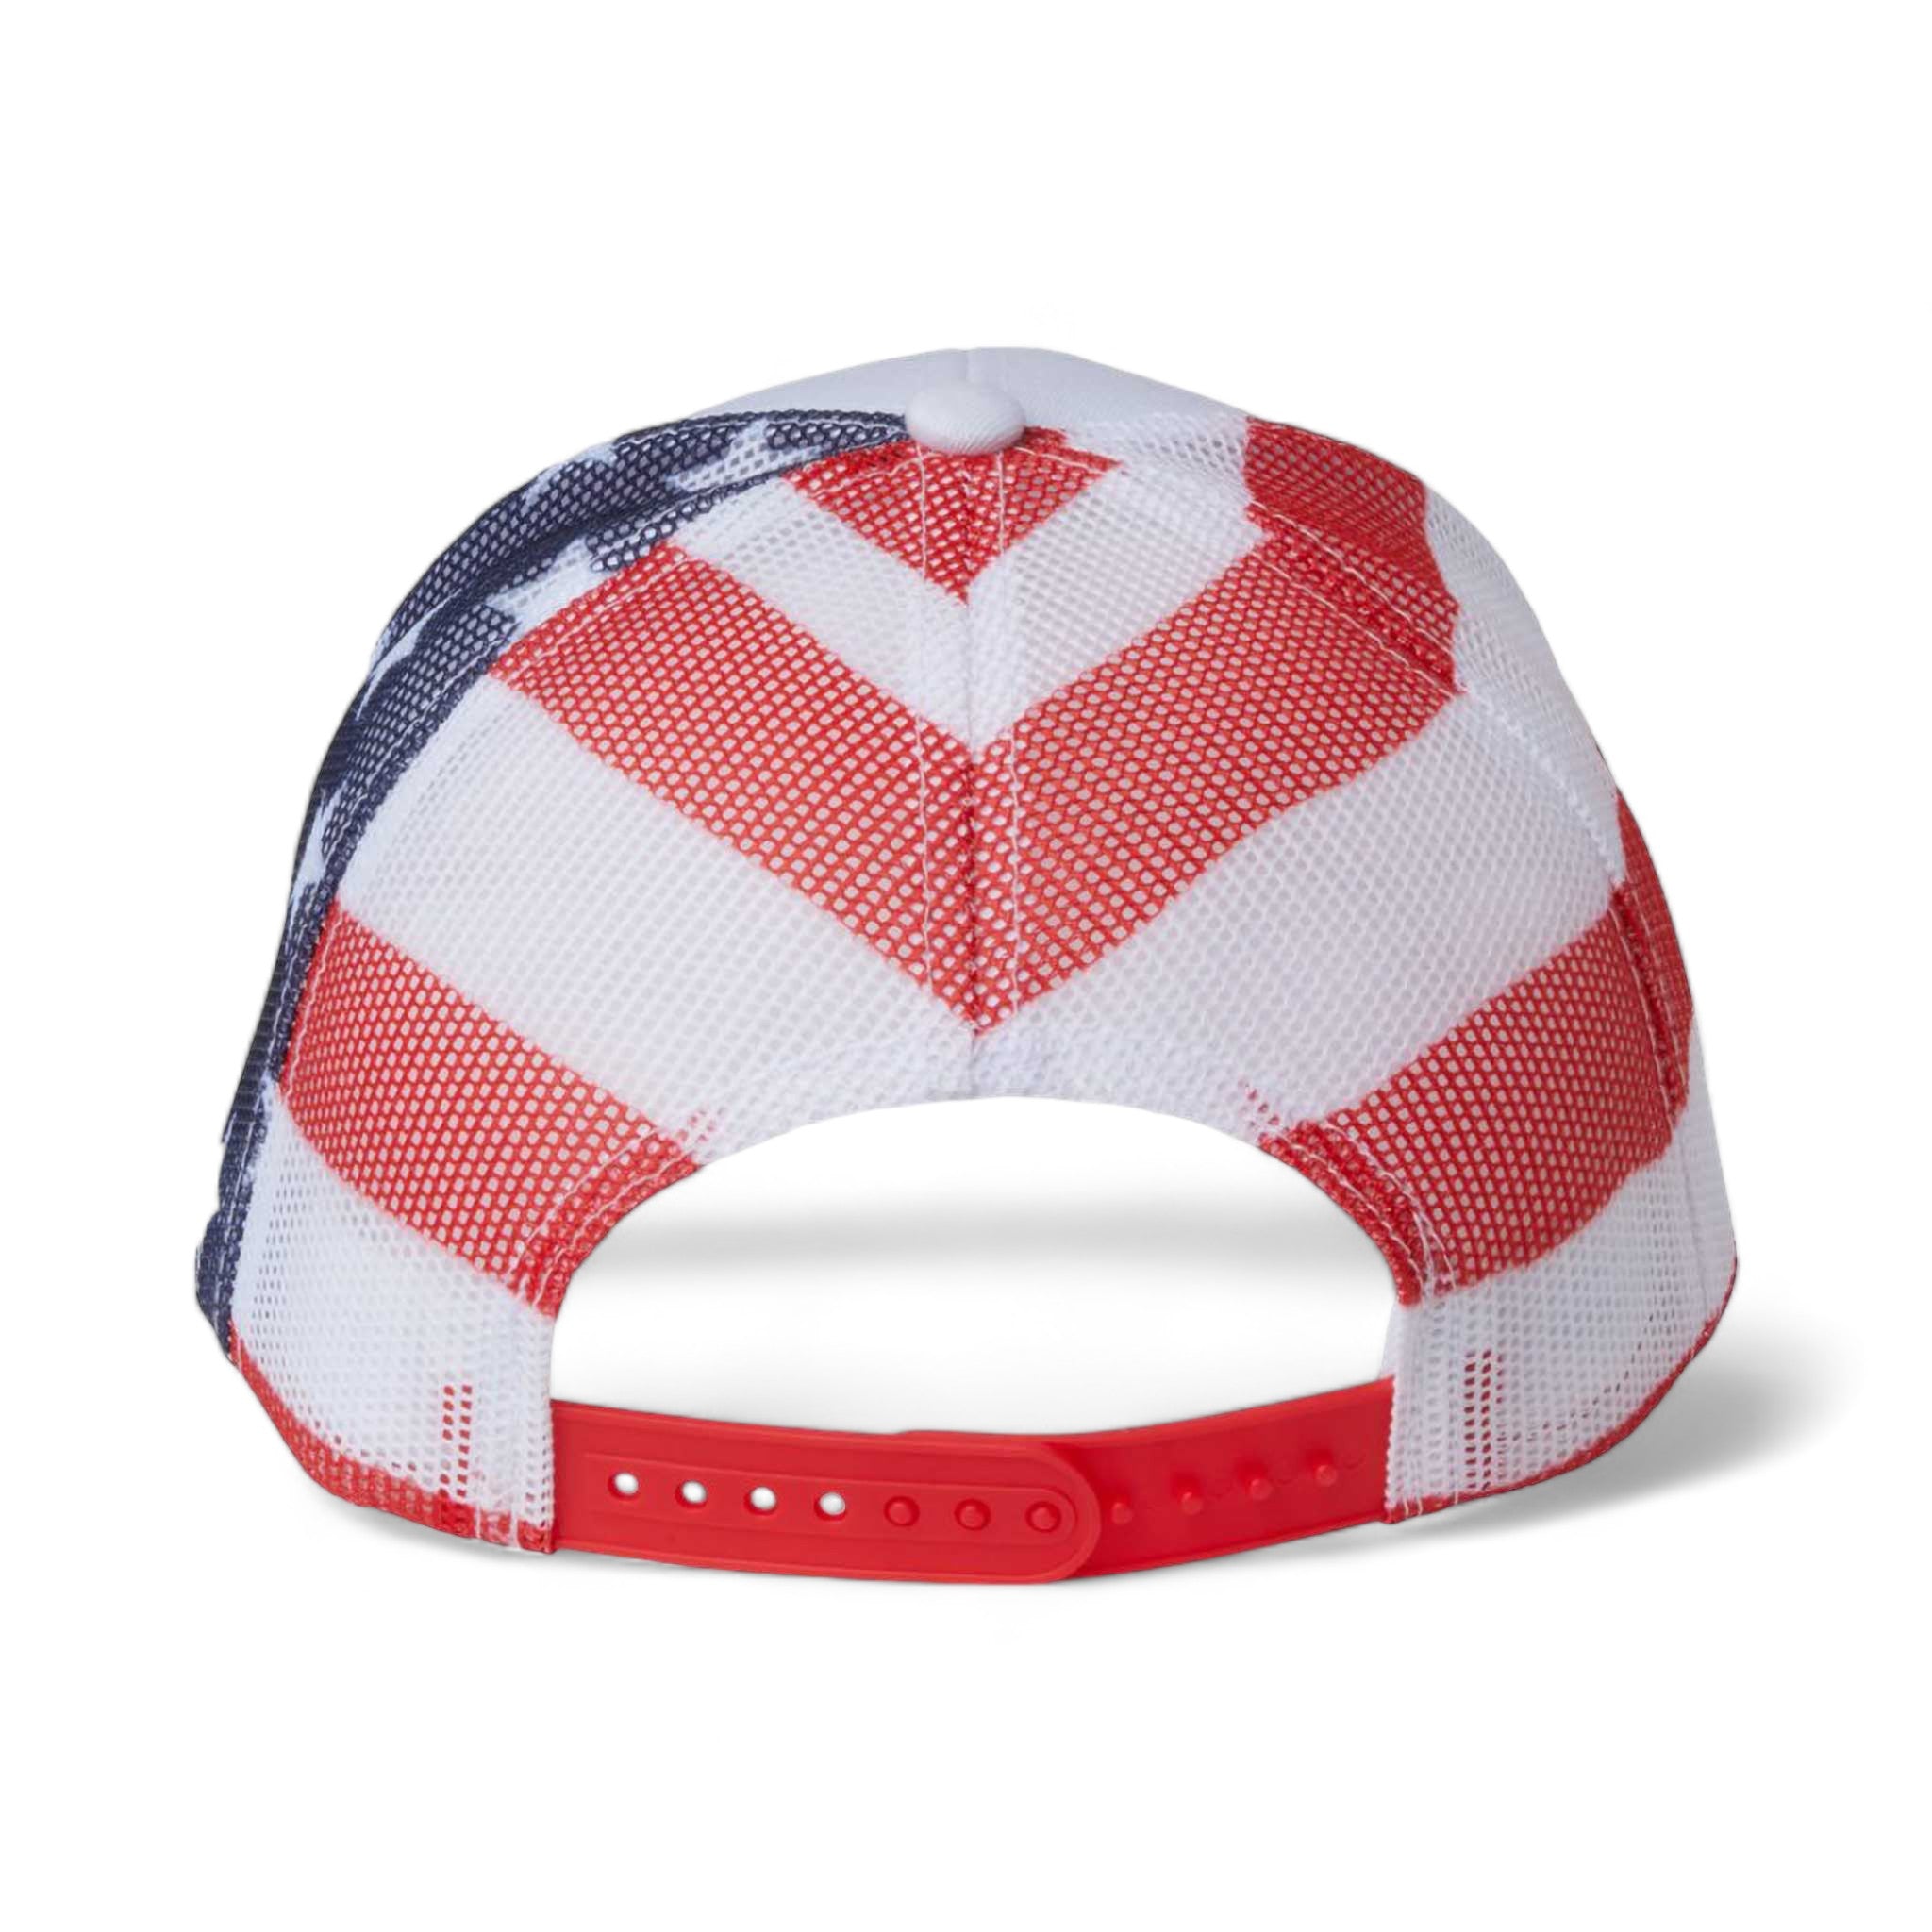 Back view of Kati S700M custom hat in white and usa flag